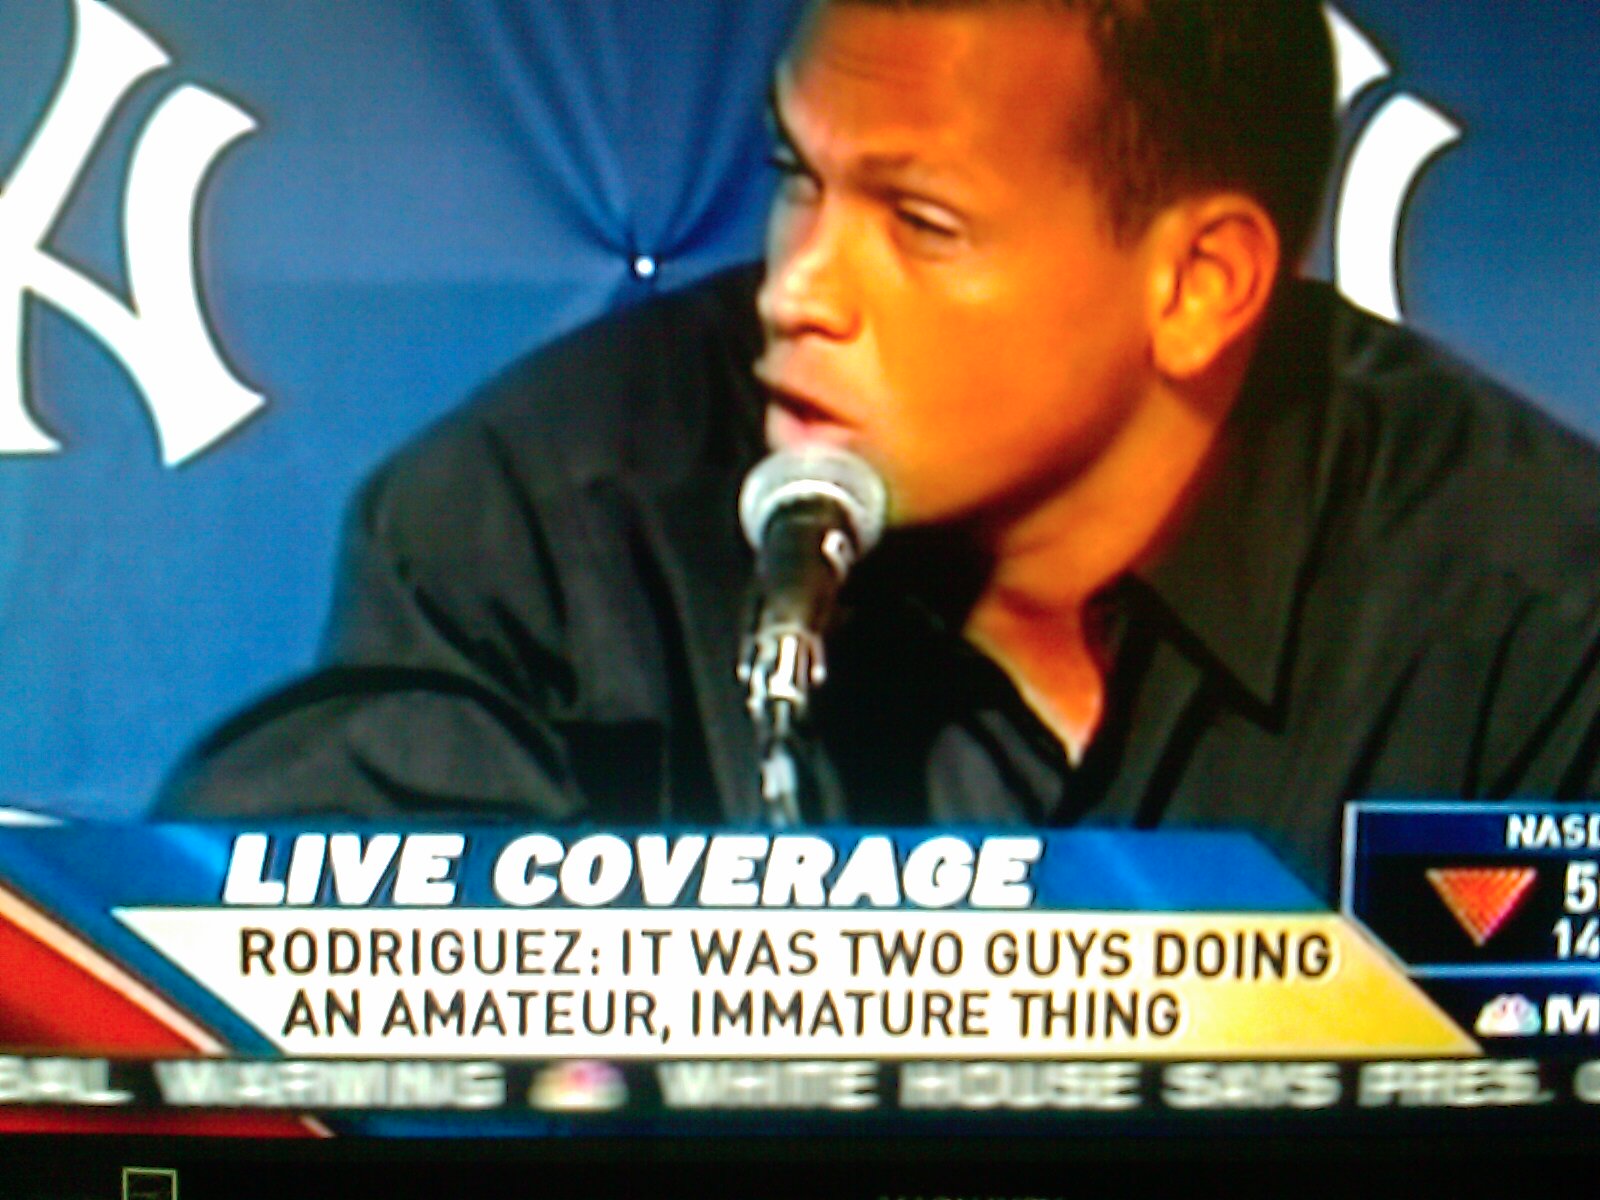 A-Rod has another confession. This time dealing with men.